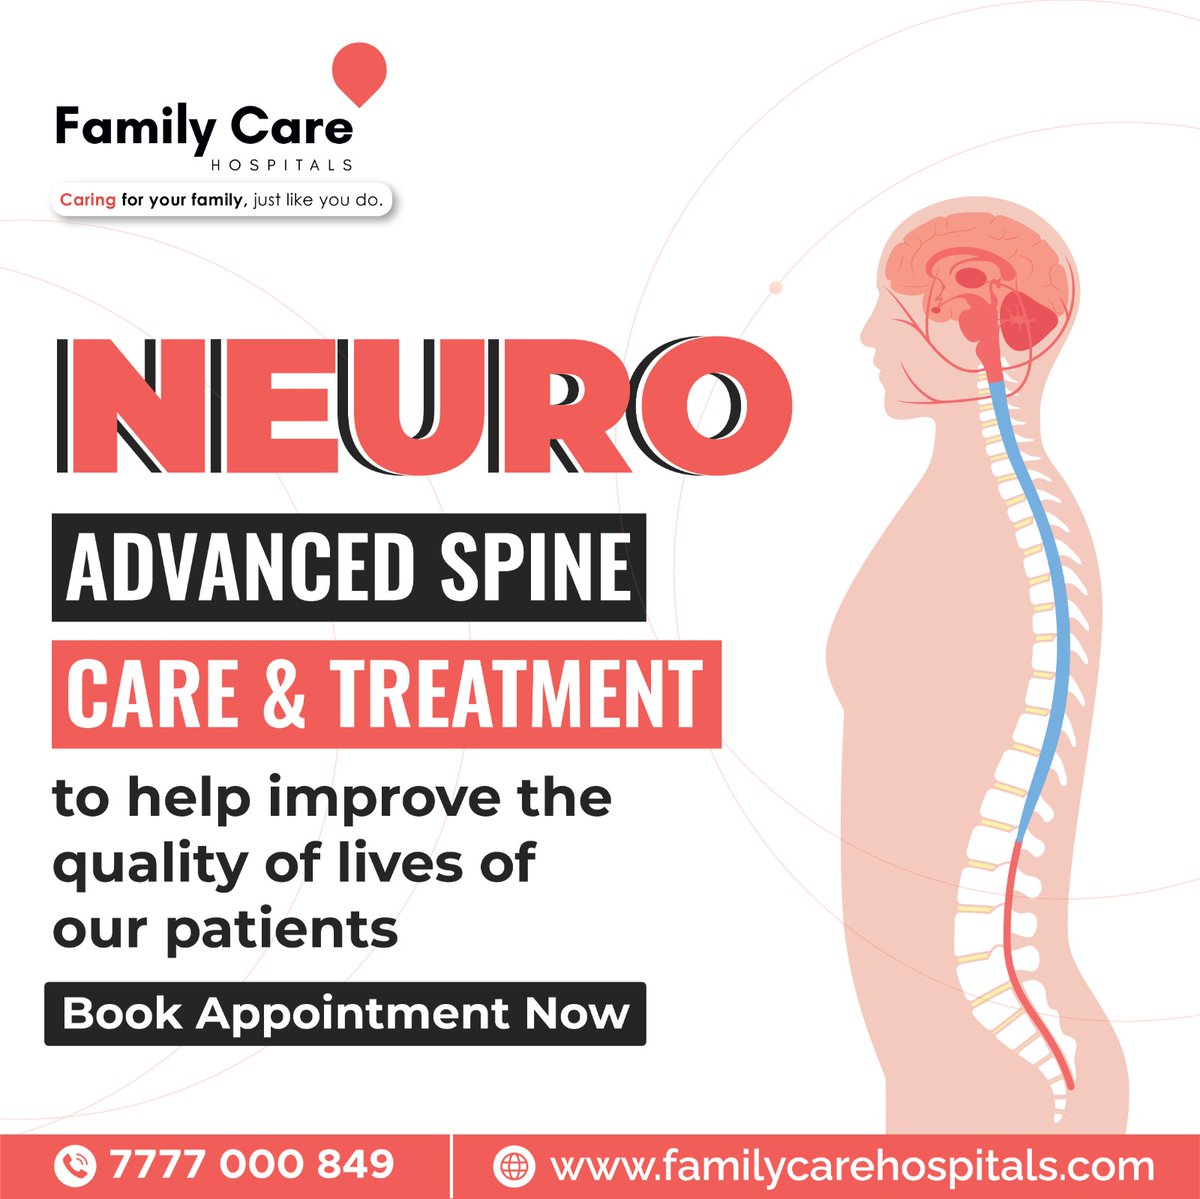 NEURO ADVANCED SPINE CARE & TREATMENT to help improve the quality of lives of our patients

Call us Now @ +91 7777 000 849

#FCH #familycare #FamilyCareHospitals #NeuroCare #SpineHealth #NeuroRecovery #SpineWellness #NeuroInnovation #SpineRehab #NeuroScience #SpineCare